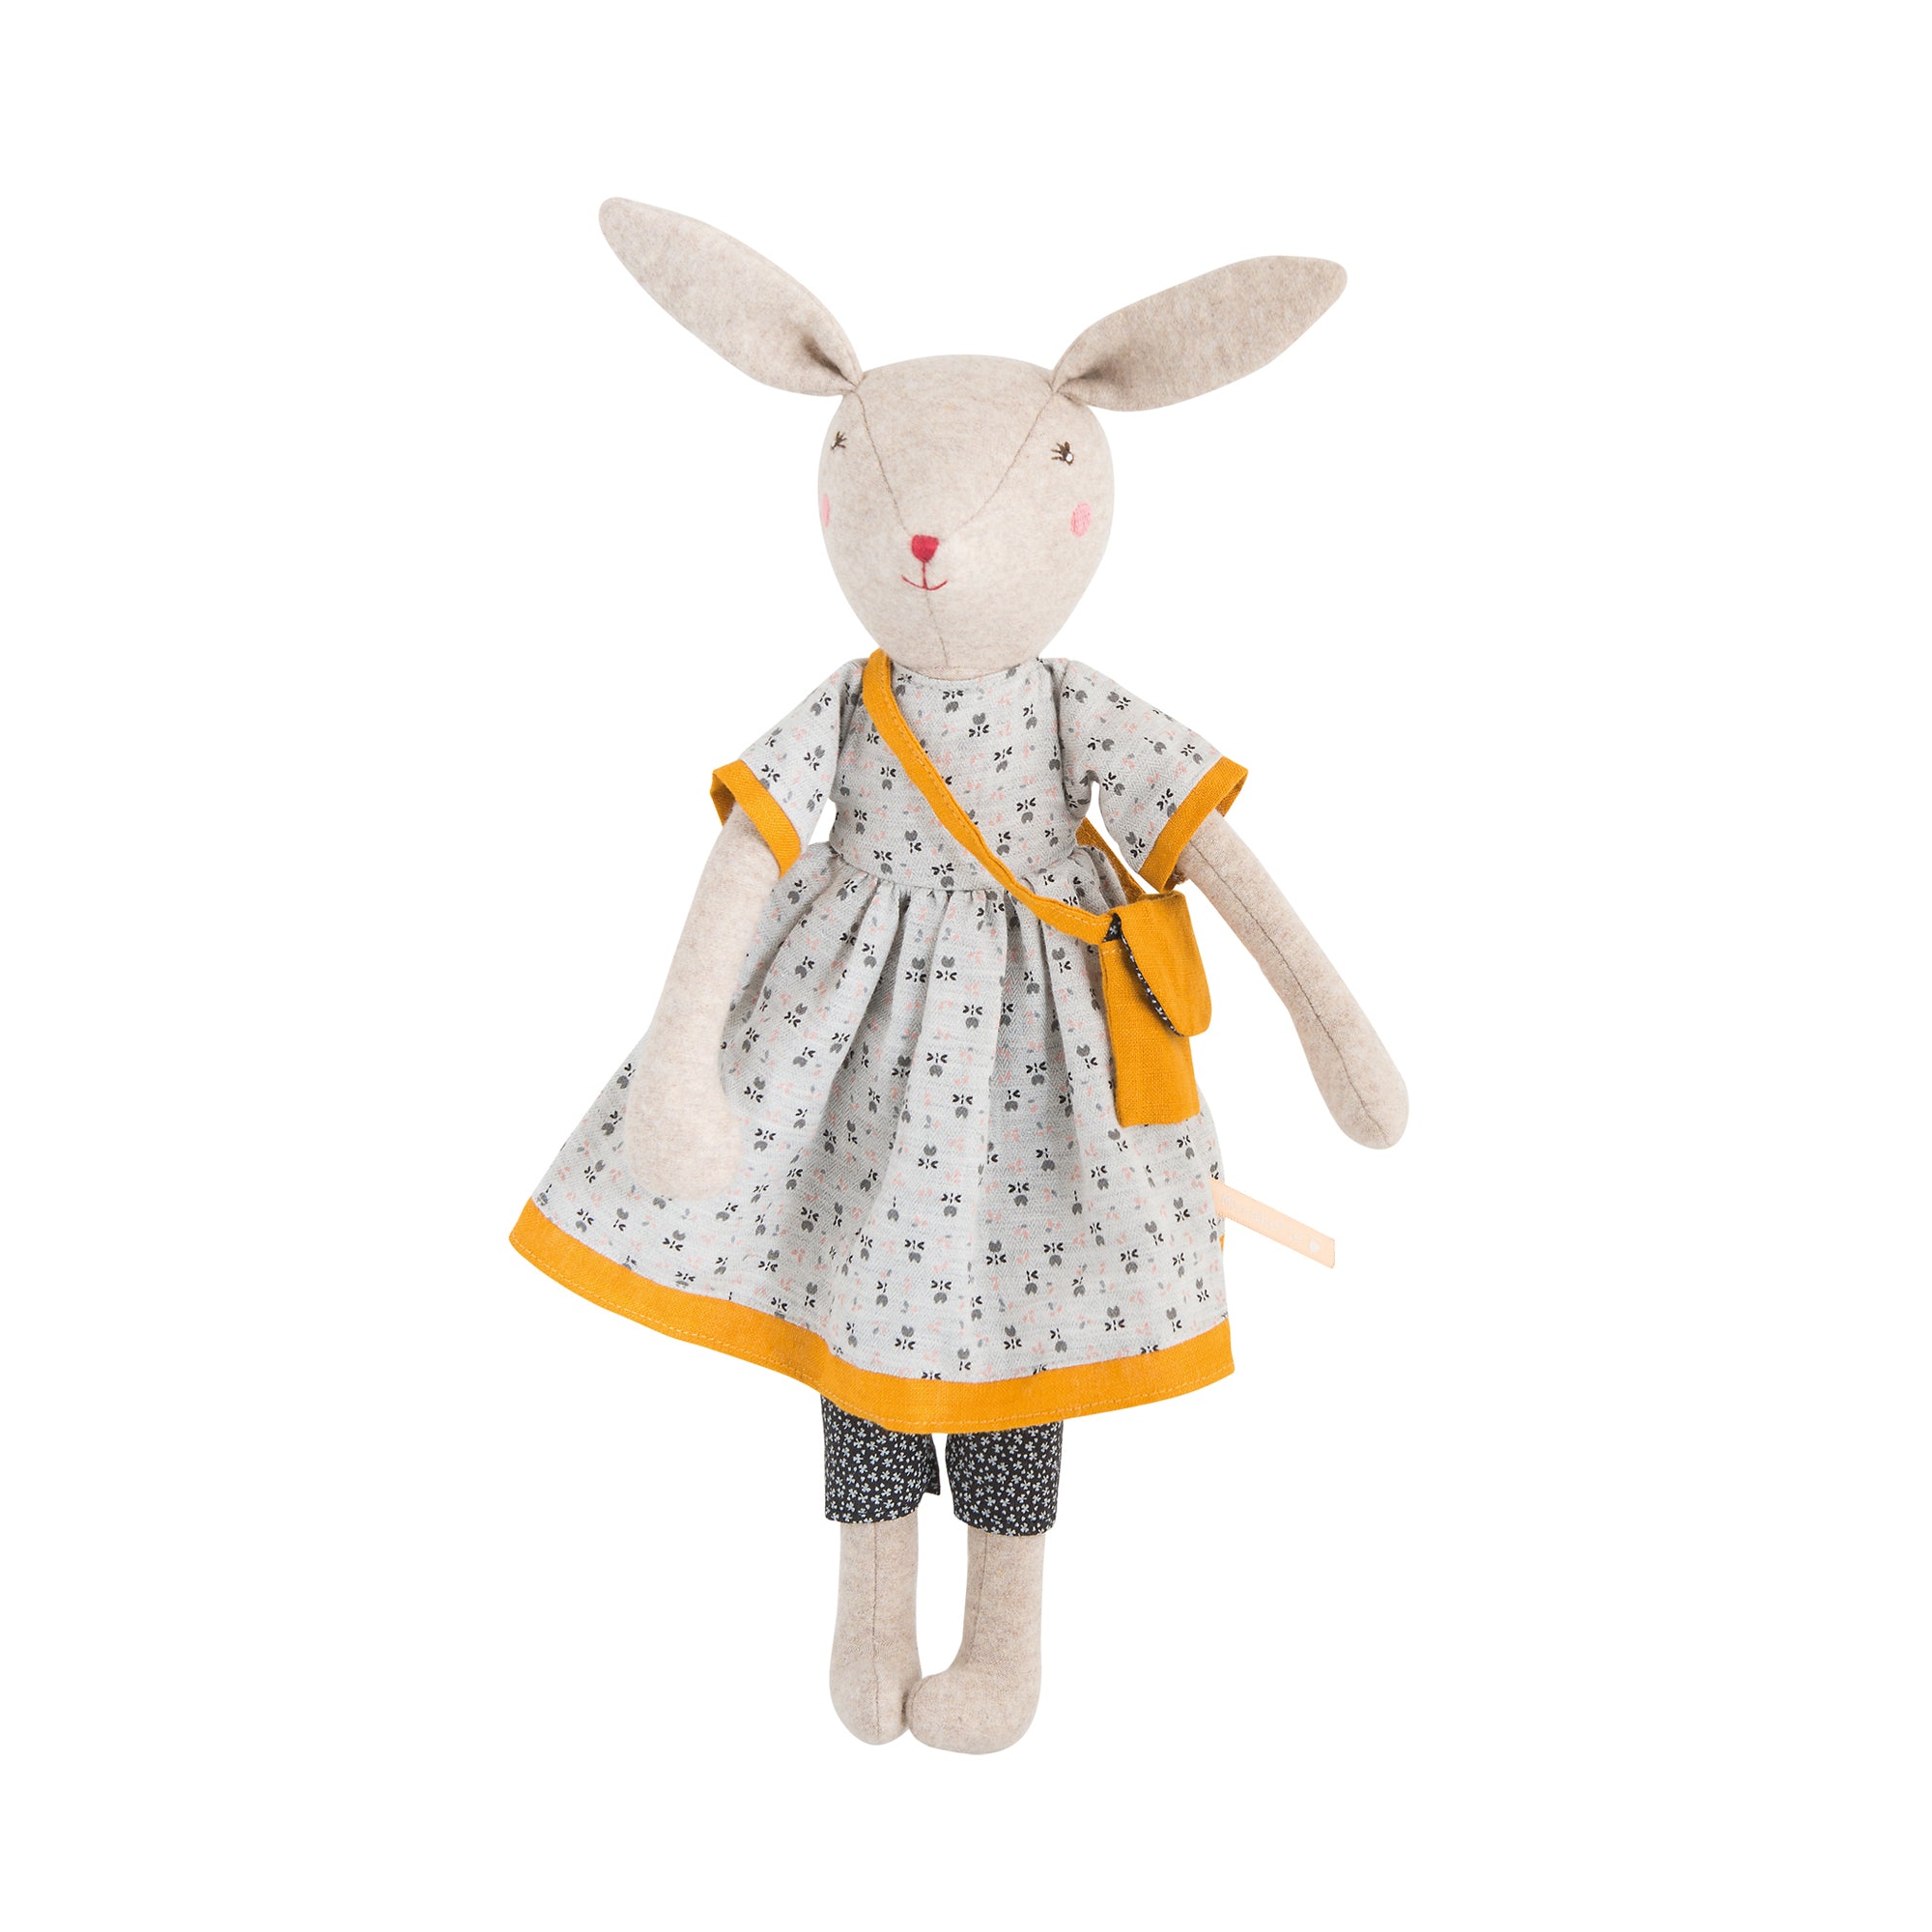 Rose Mummy Rabbit by Moulin Roty, available at Bobby Rabbit.